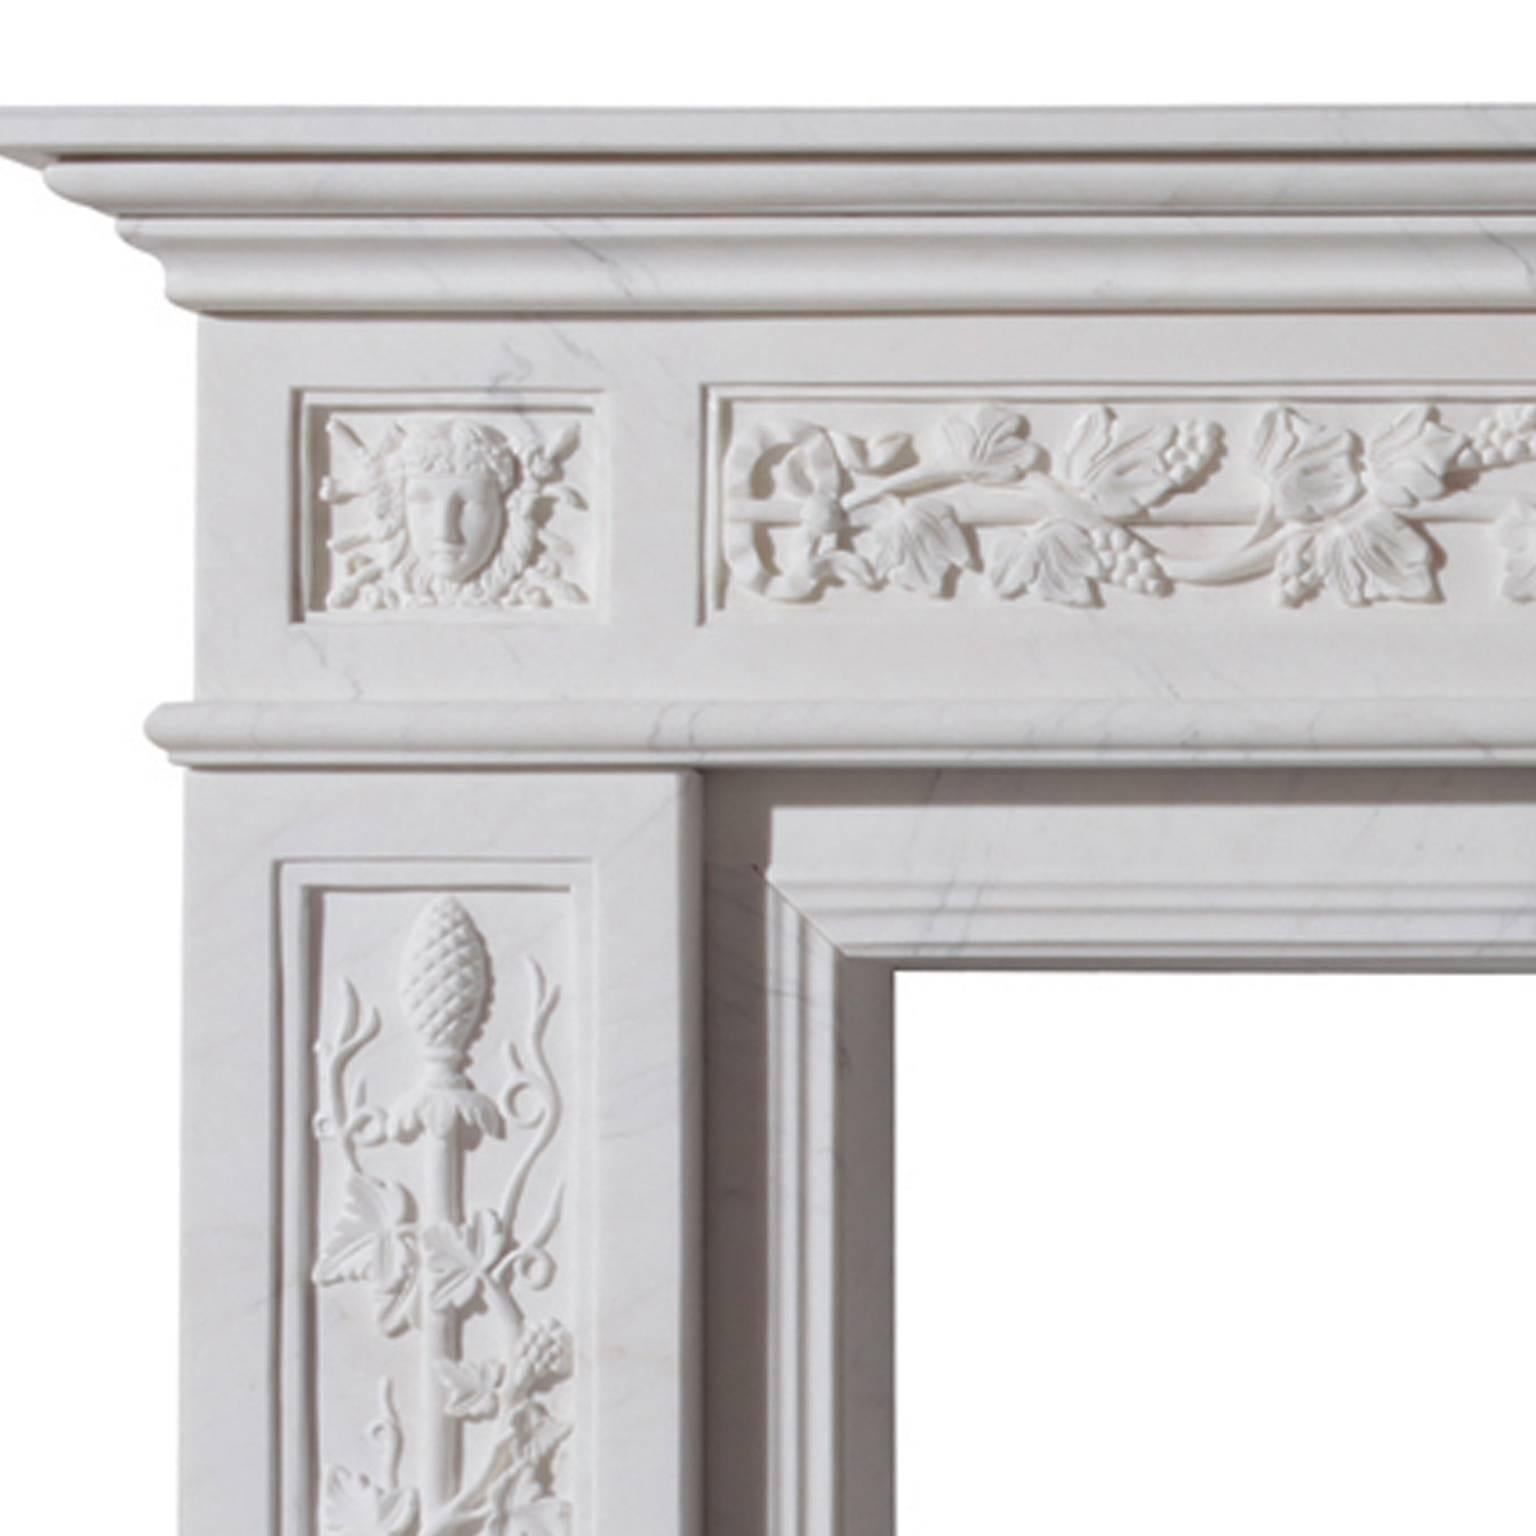 Unique fireplace produced under license from Kenwood House Hampstead, London. Finely detailed vines bearing clusters of ripe grapes clamber up the jambs and across the frieze of the dining room chimney-piece. Expertly hand-carved in imperial white